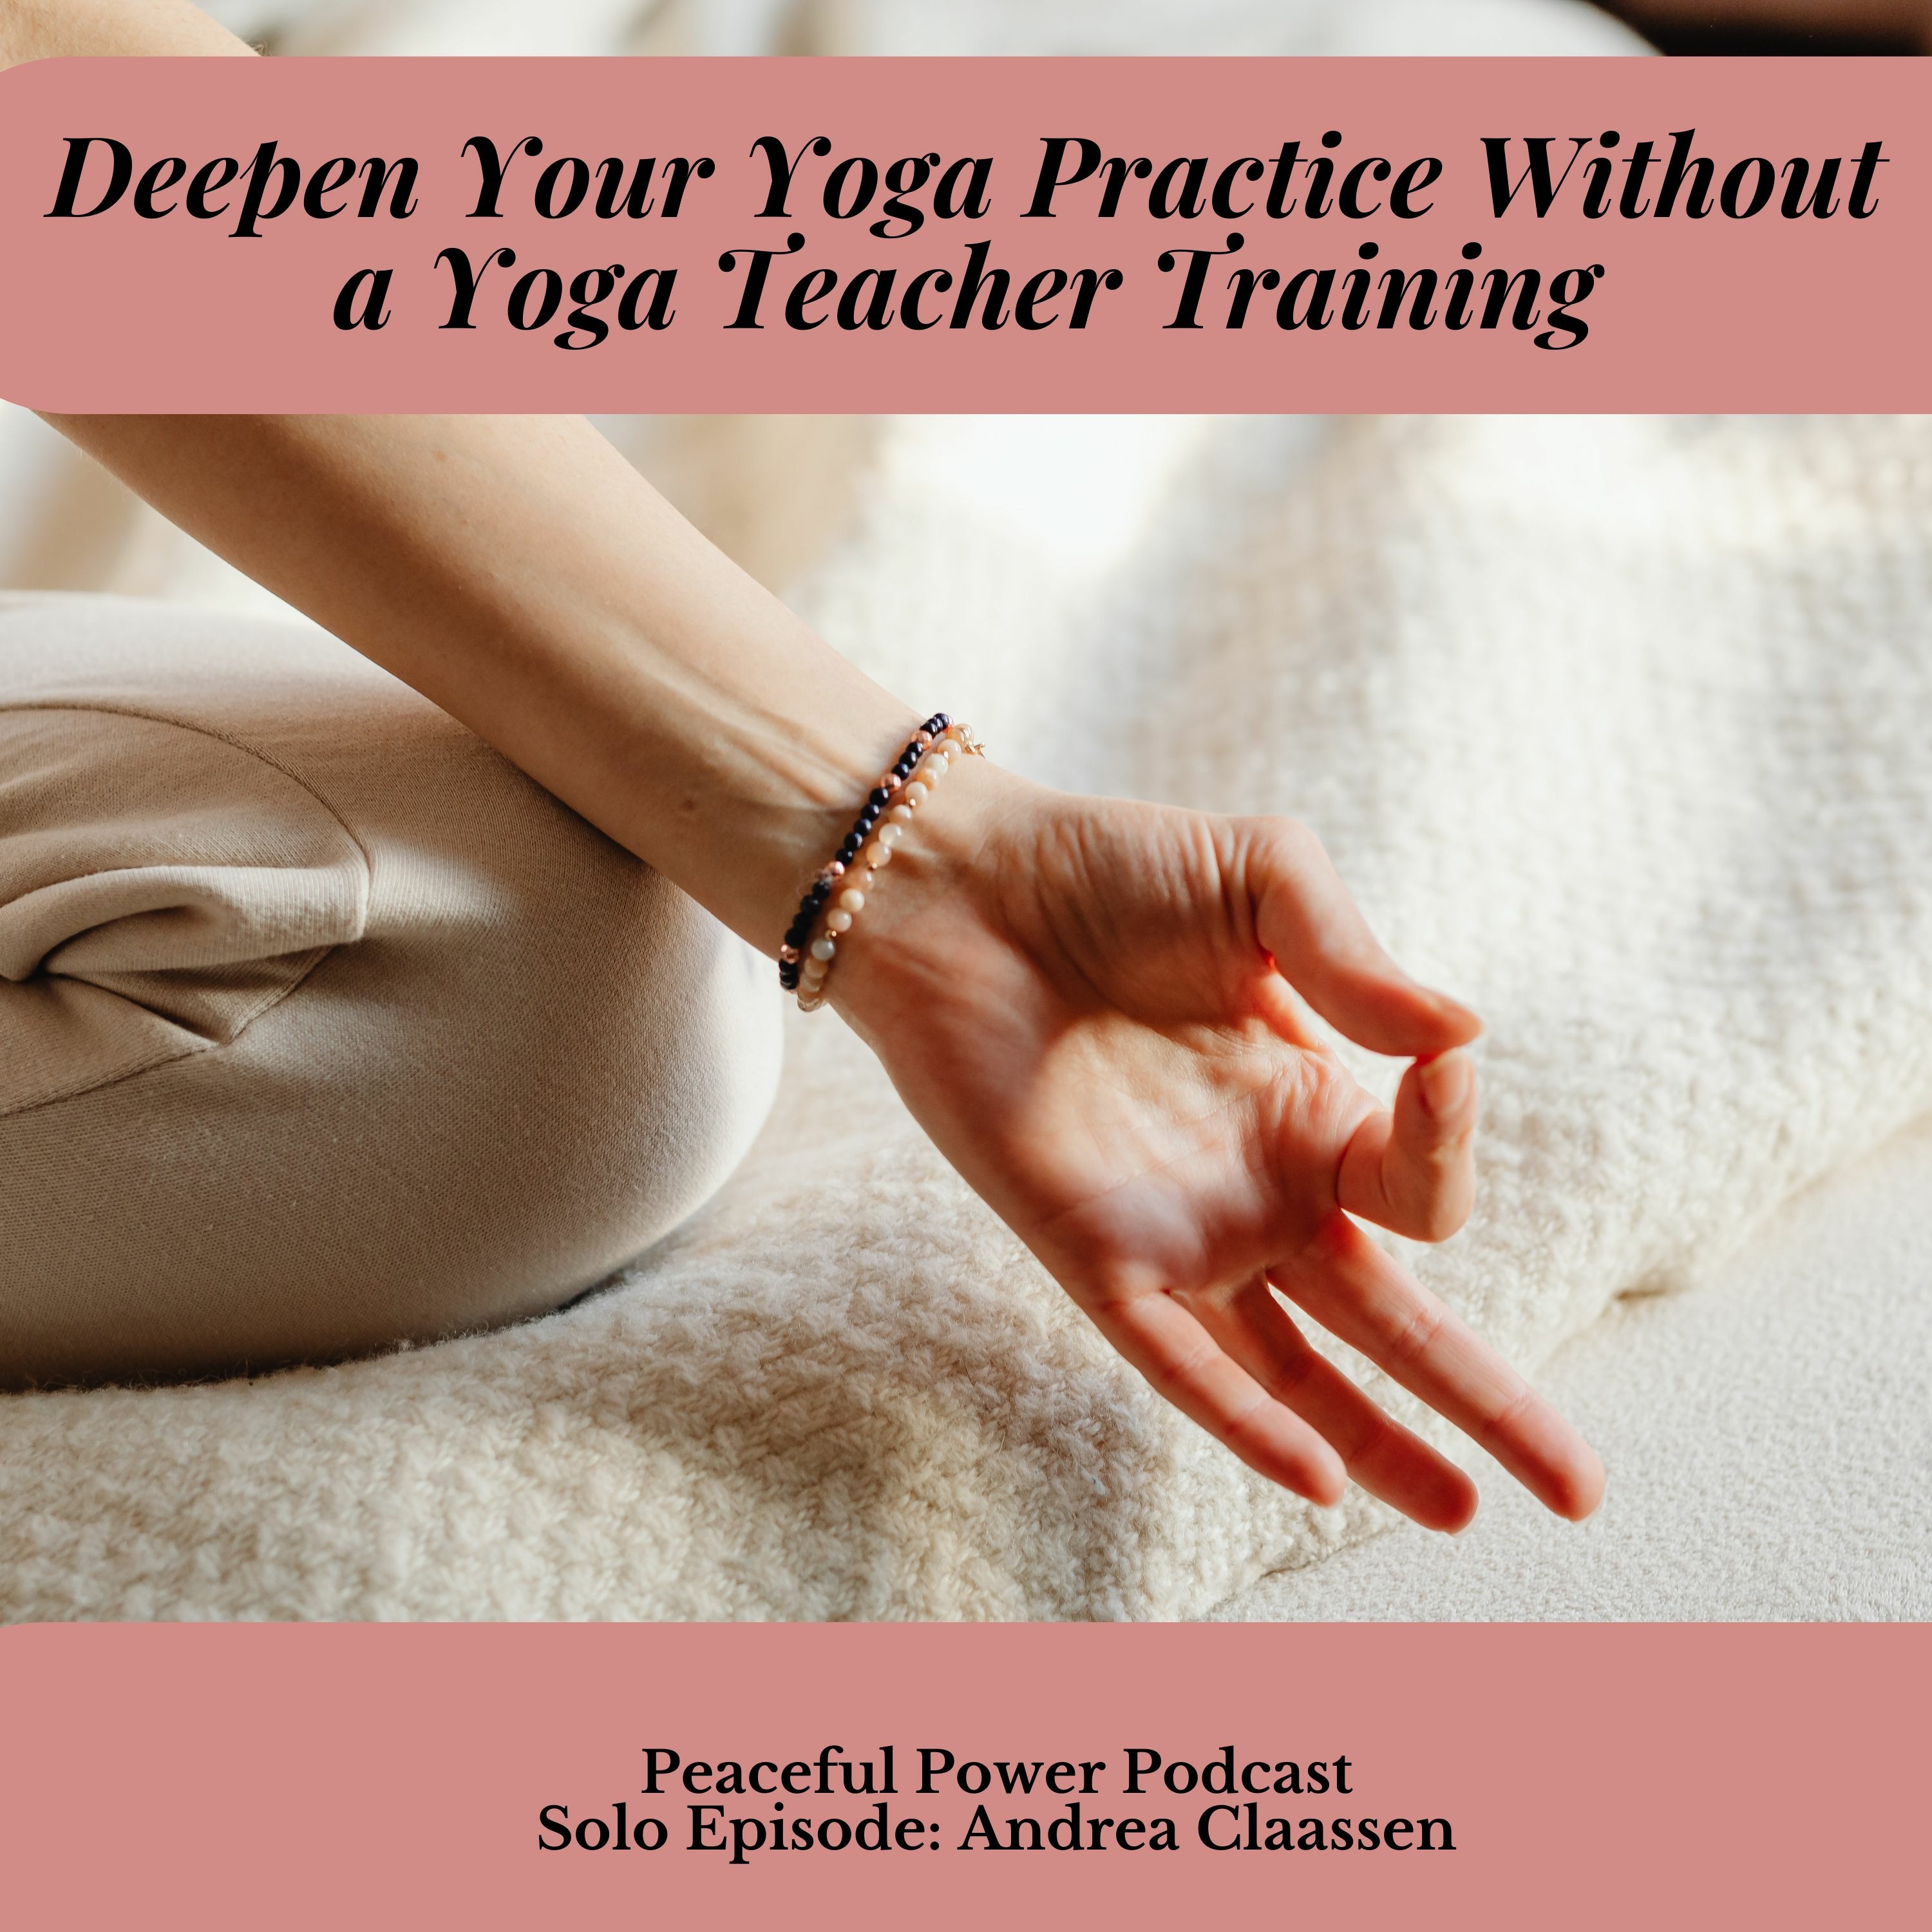 Deepen Your Yoga Practice Without a Yoga Teacher Training